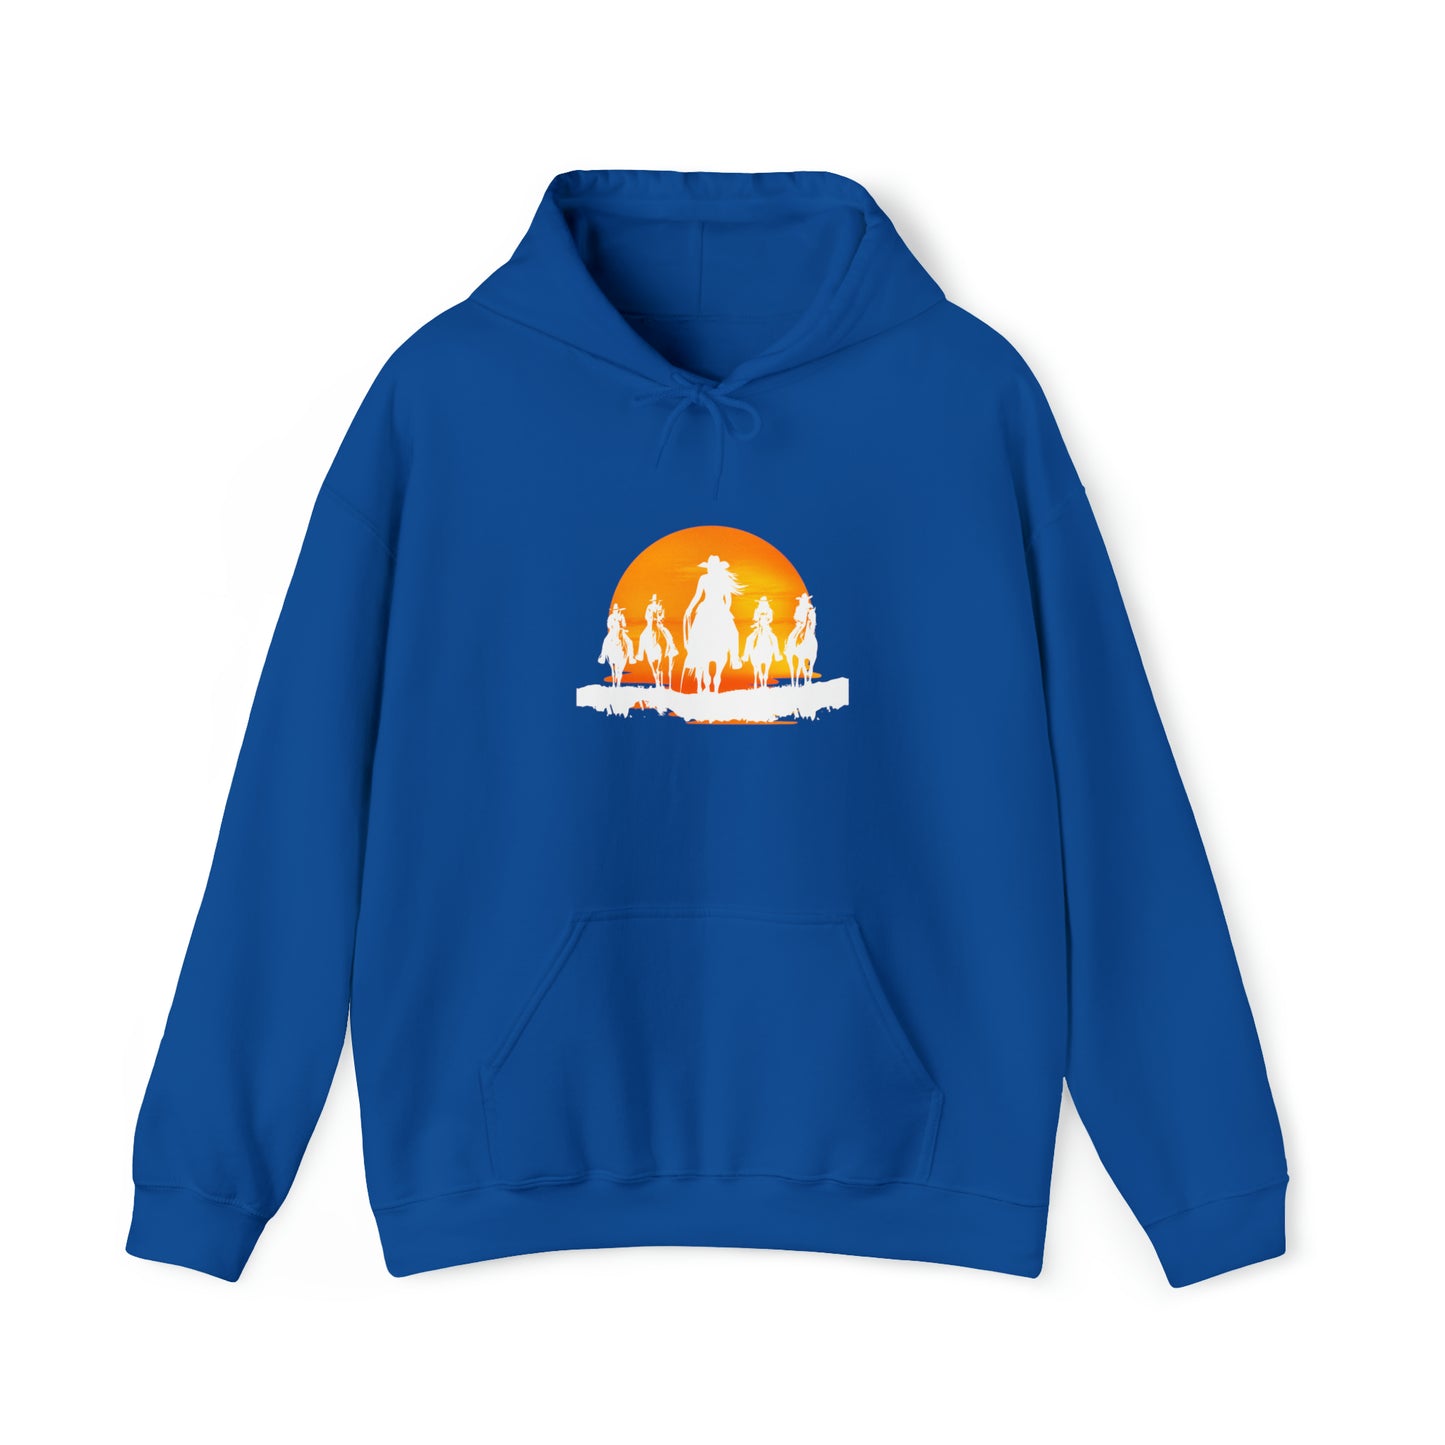 Cowgirls in the sunset  - Unisex Heavy Blend™ Hooded Sweatshirt